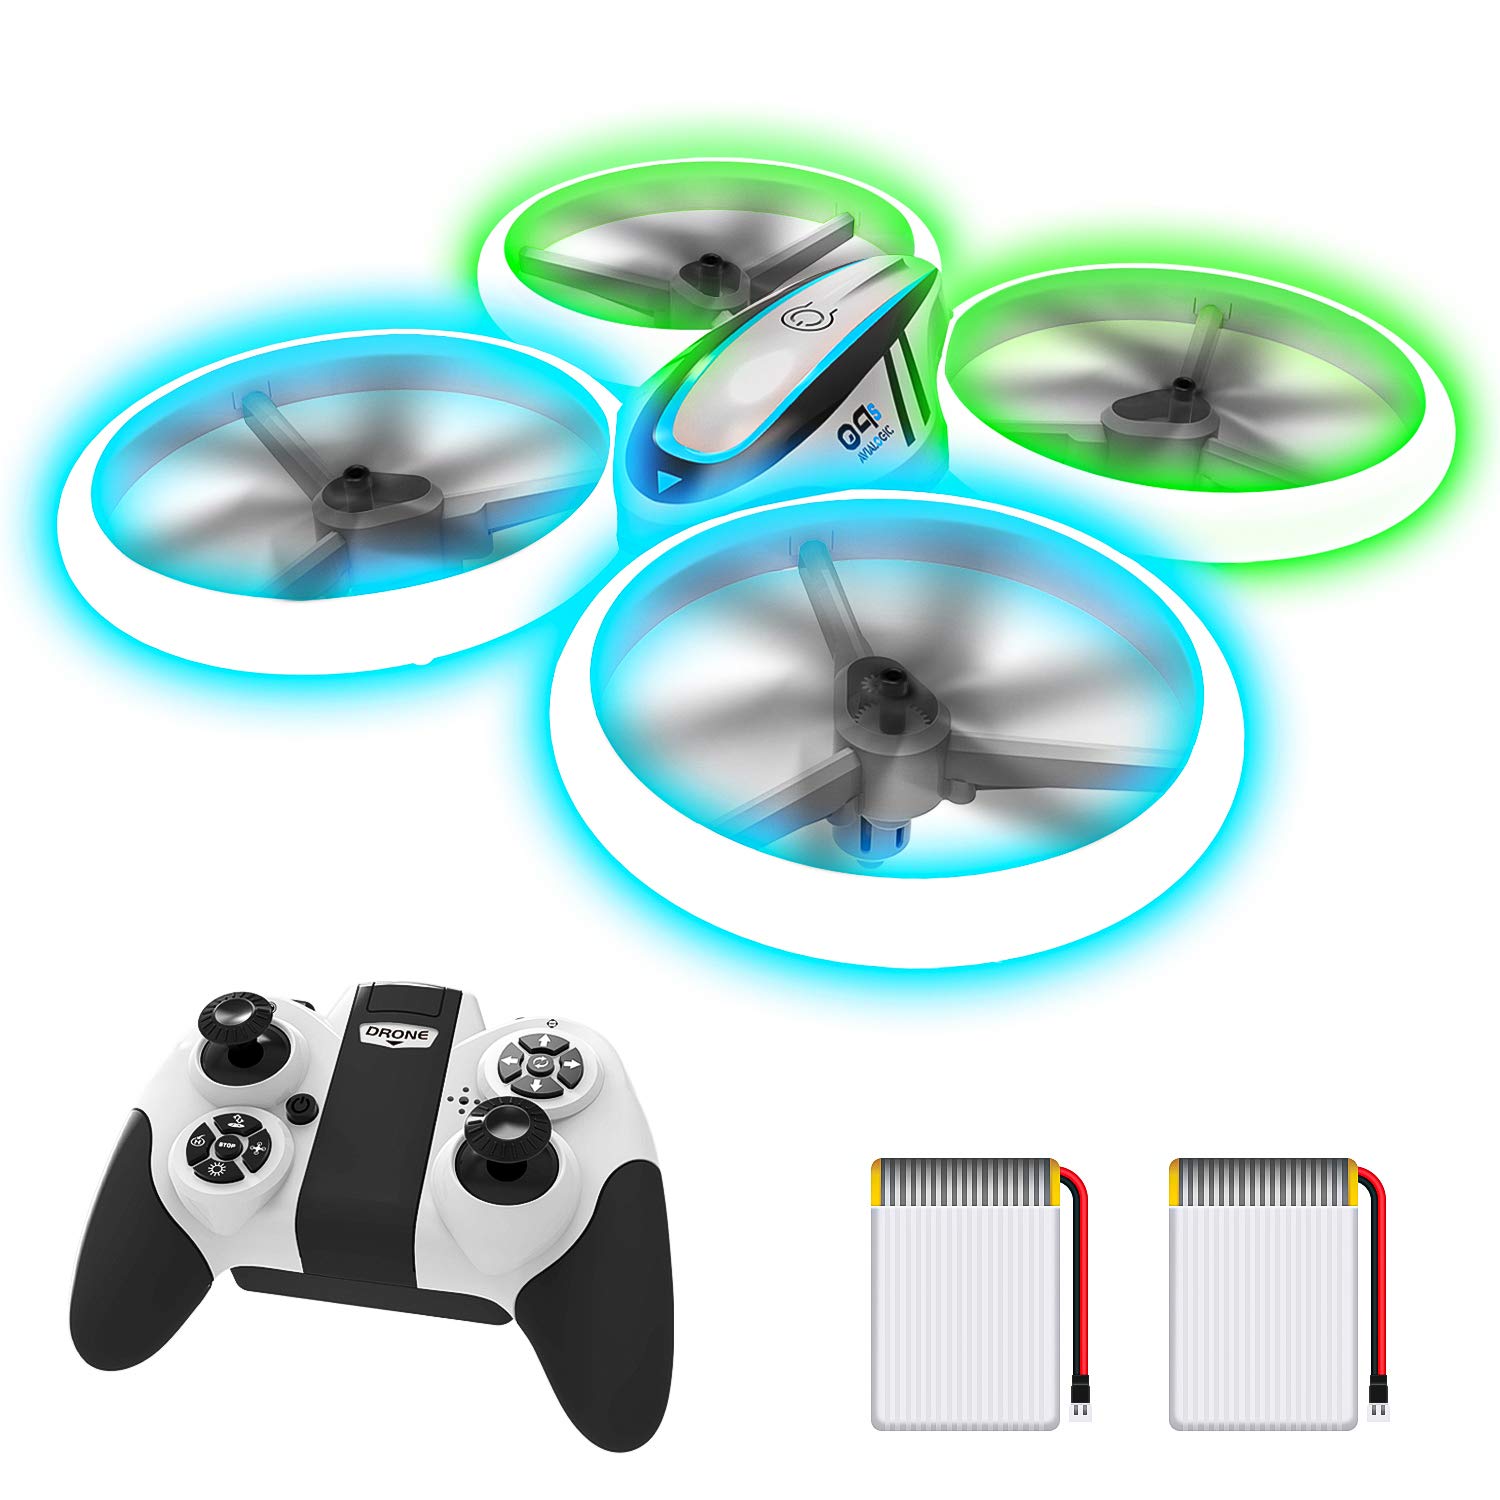 HASAKEE Q9s Drones for Kids,RC Drone with Altitude Hold and Headless Mode,Quadcopter with Blue&Green Light,Propeller Full Protect,2 Batteries and Remote Control,Easy to fly Kids Gifts Toys for Boys and Girls